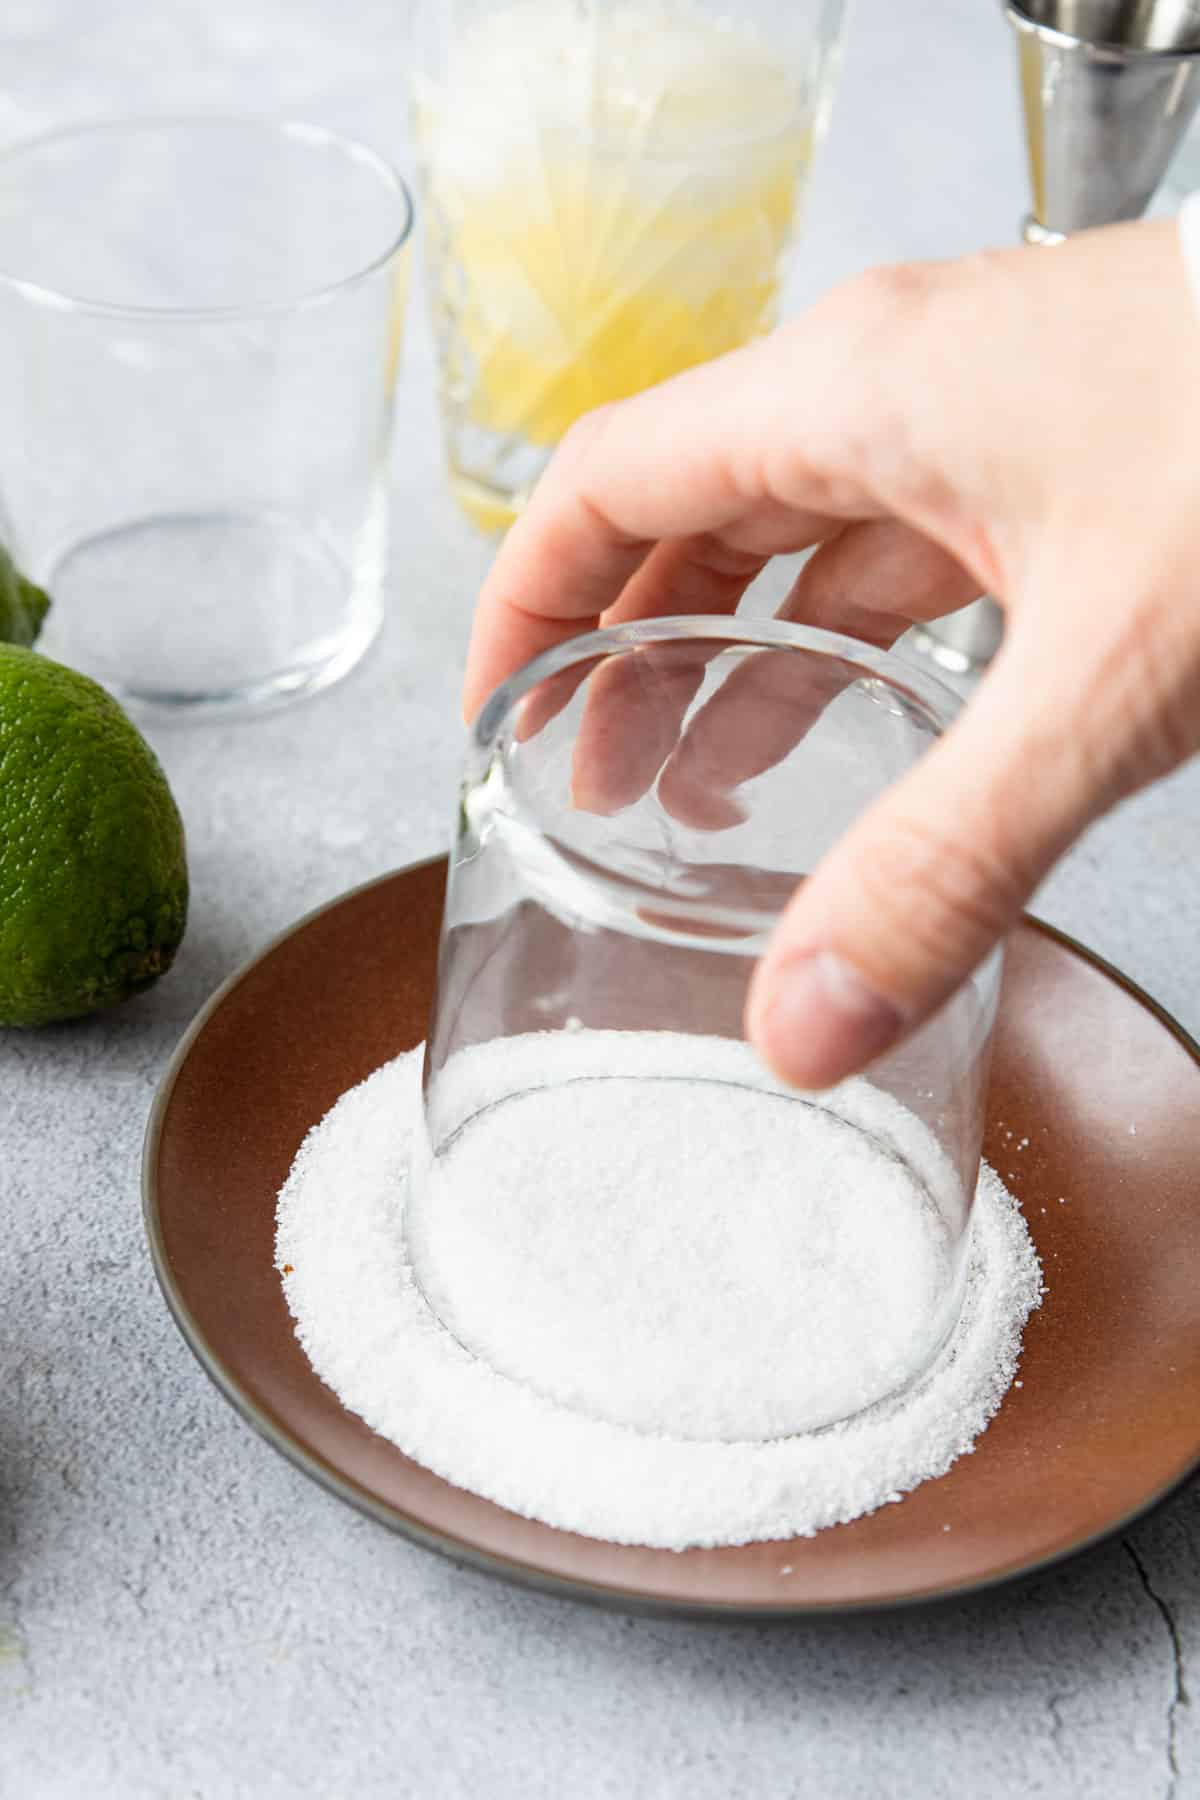 dipping a glass in a plate full of kosher salt